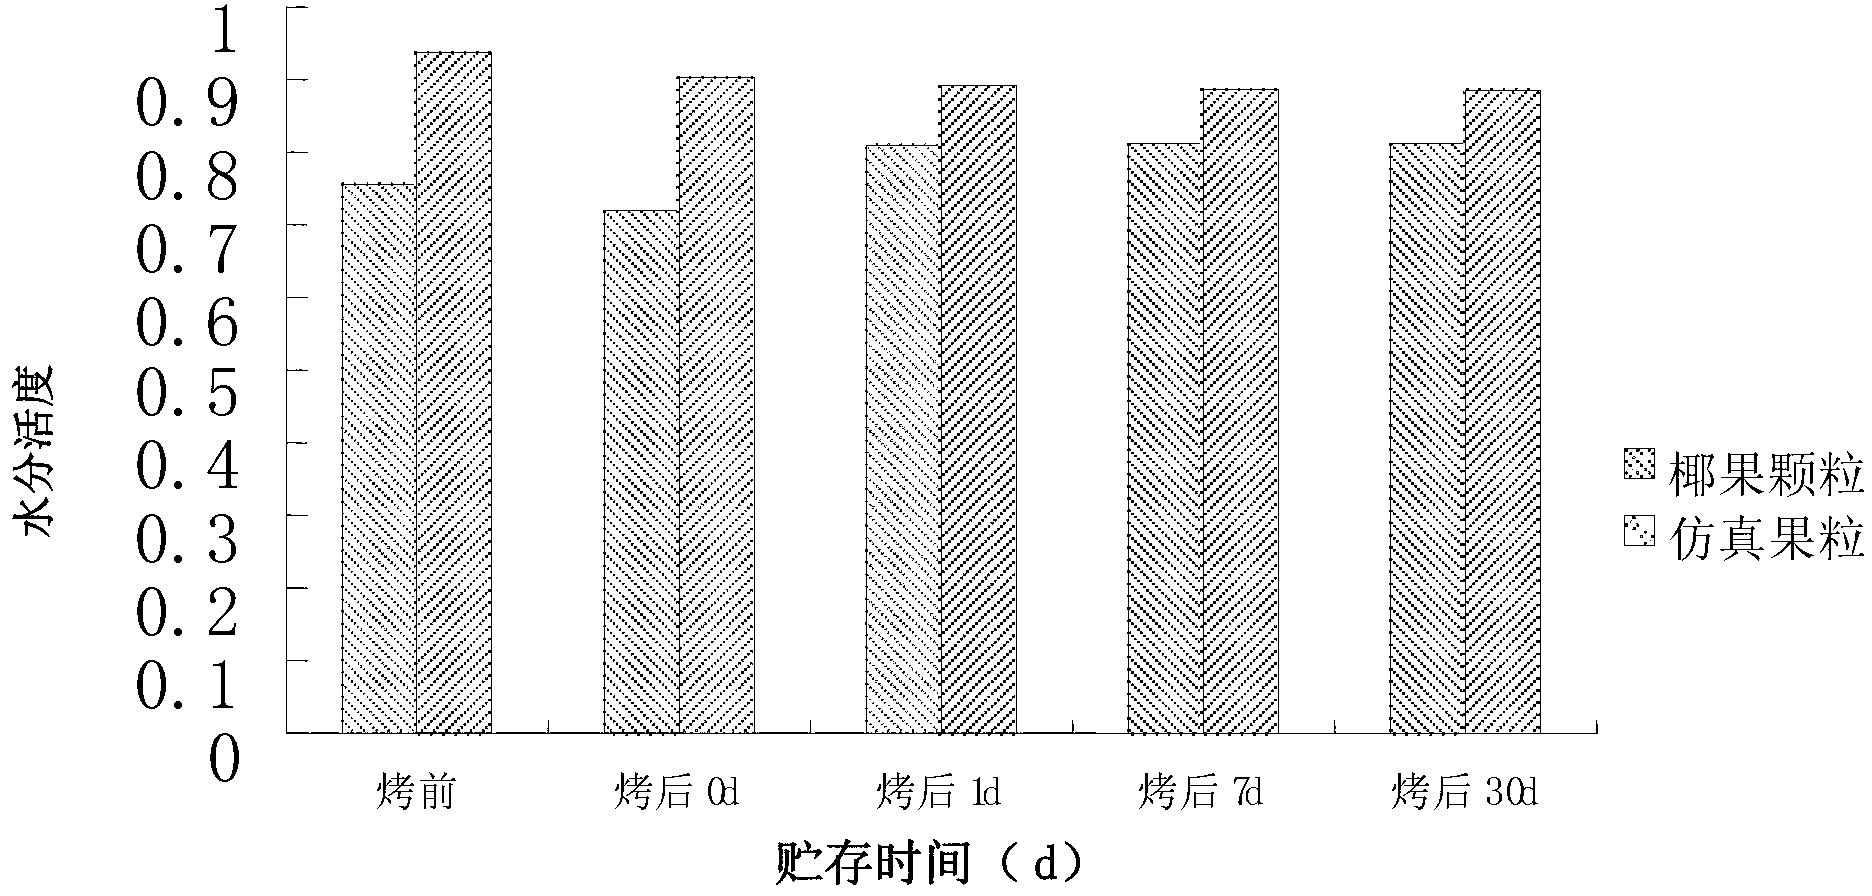 Baking-resistant simulated fruit and preparation method and application thereof